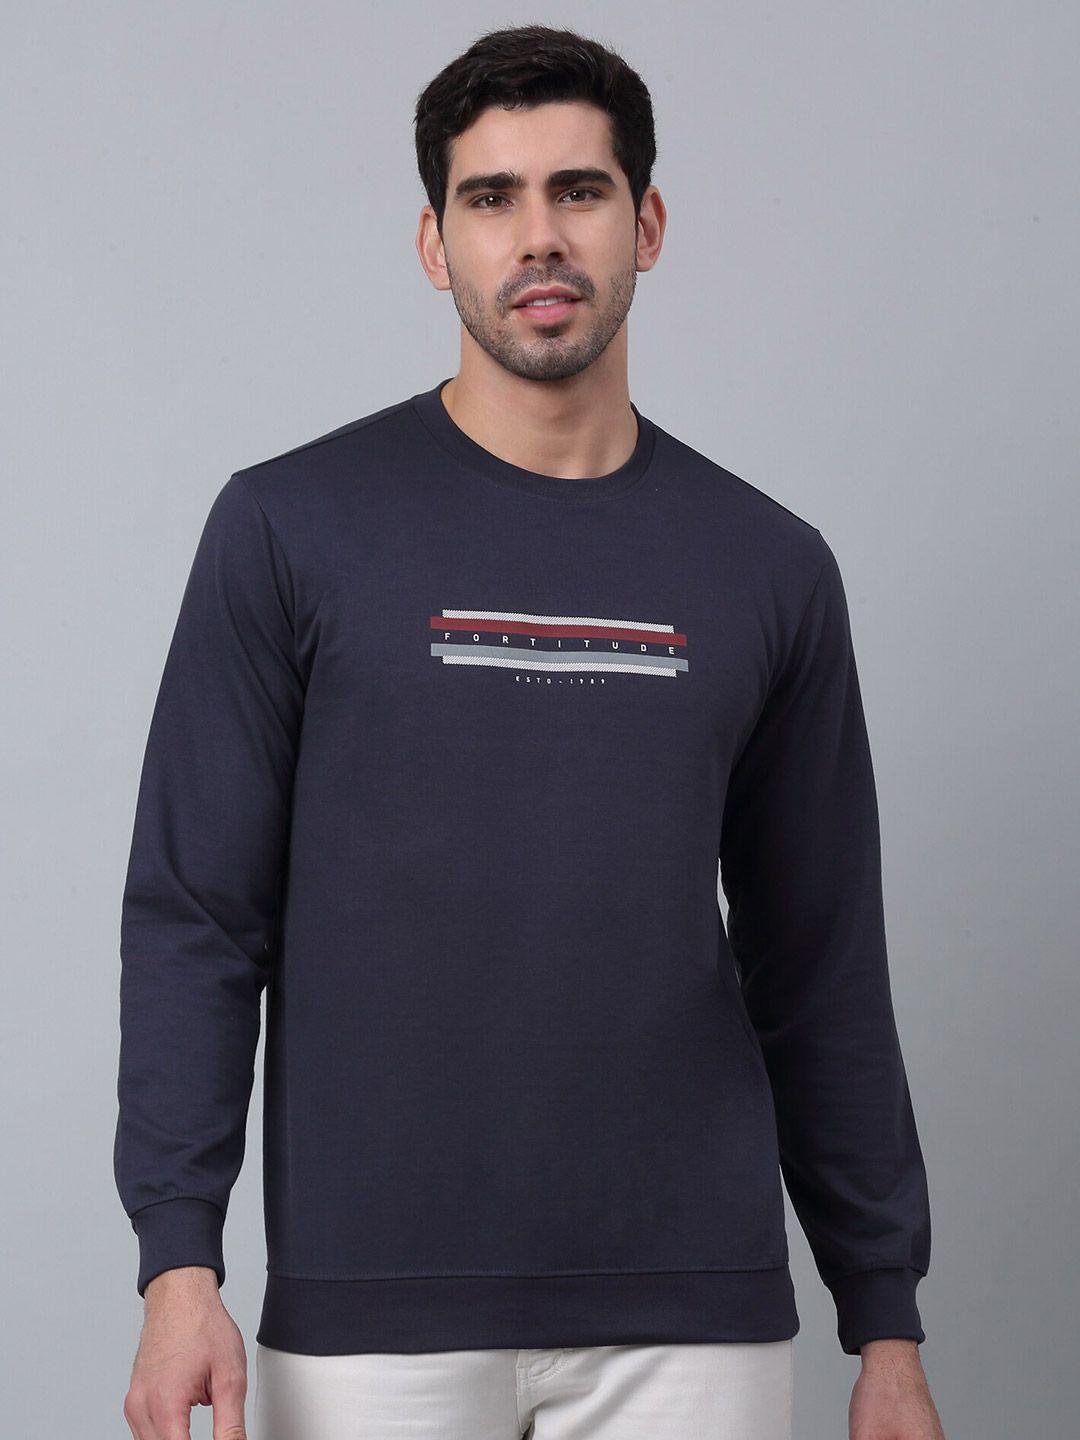 cantabil typography printed cotton pullover